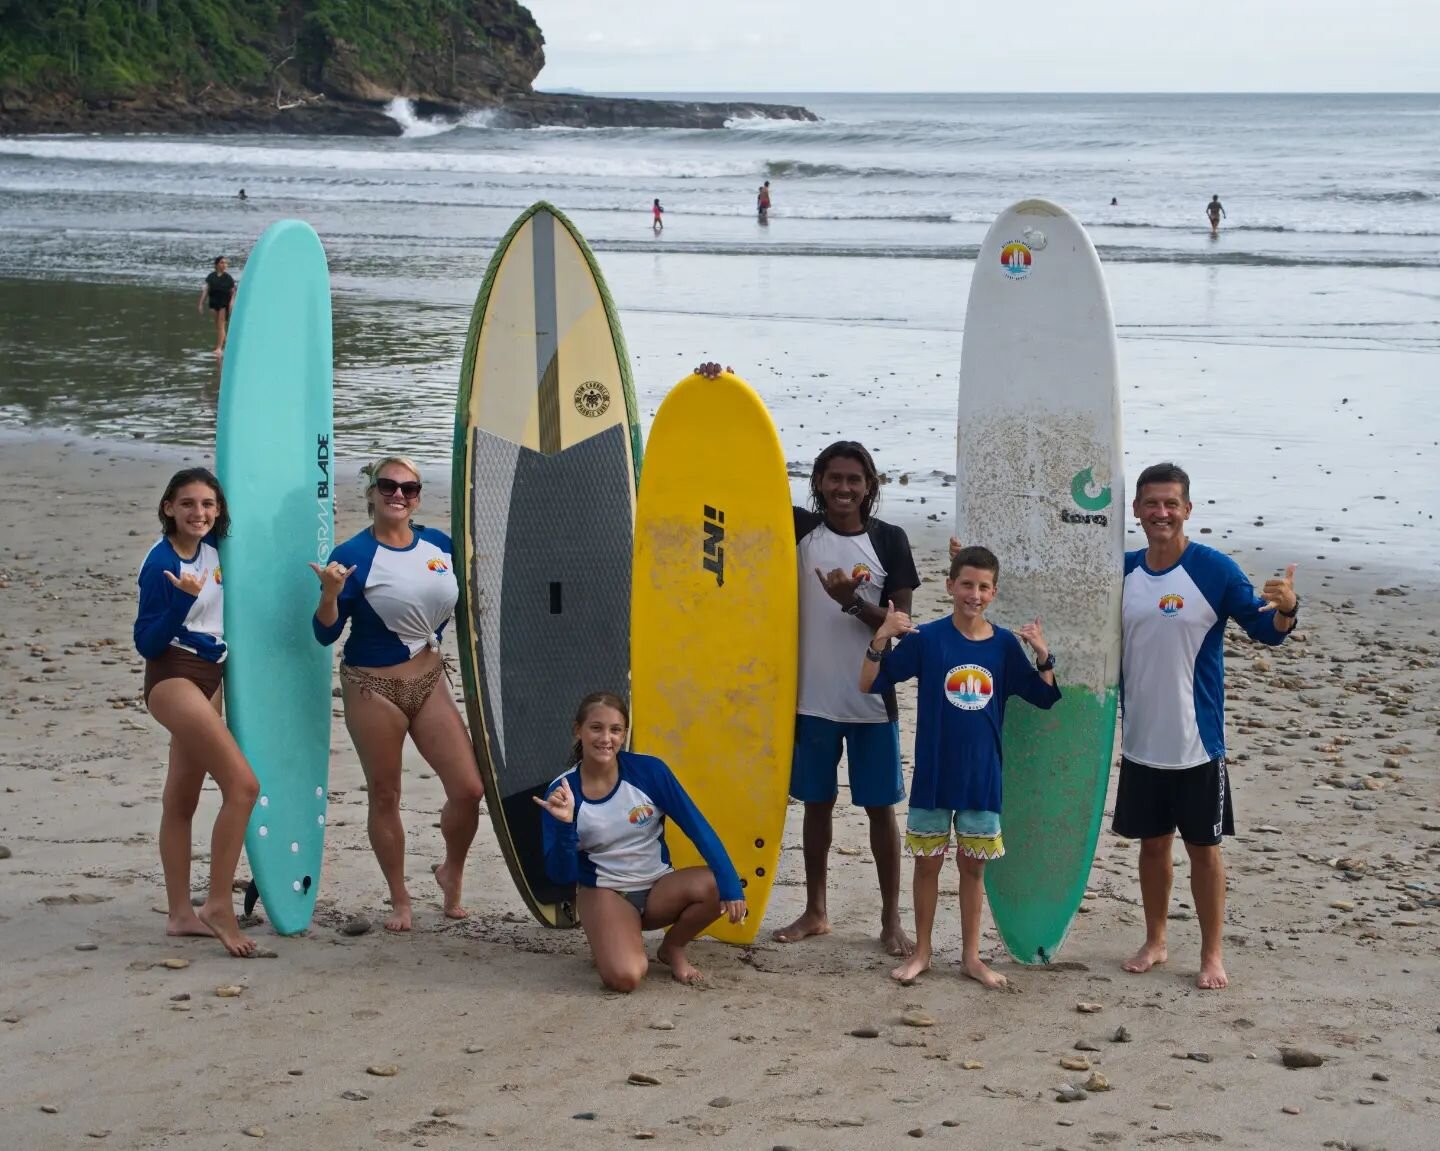 Surf lessons with the whole family! We had an awesome couple of days surfing with you guys, and can't wait until your next trip down! 
.
.
.
.
.
#surftrip #surfnicaragua #sanjuansurfschool #sjds #travelnicaragua #beyondthedreamsurf #nicasurf